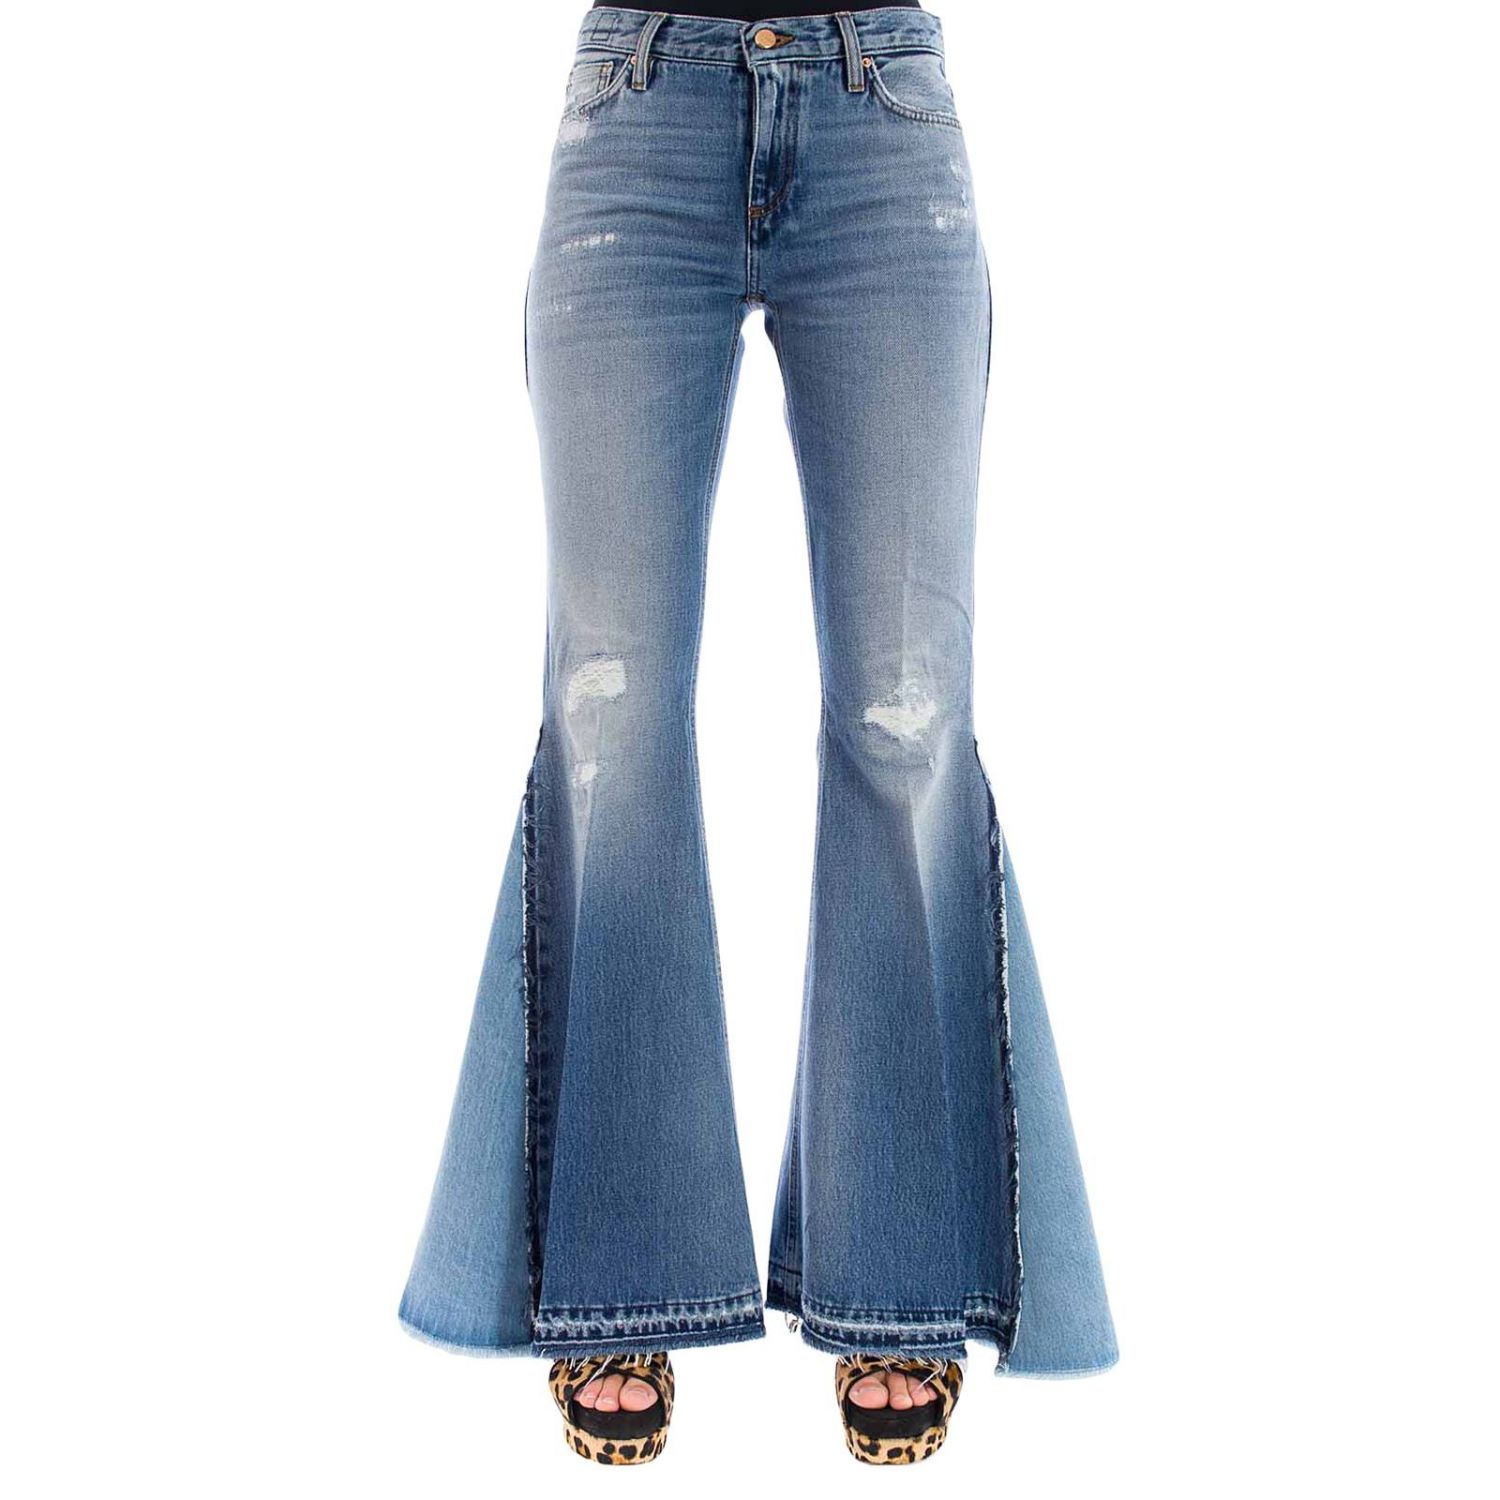 Don The Fuller Outlet: jeans for woman - Blue | Don The Fuller jeans ...